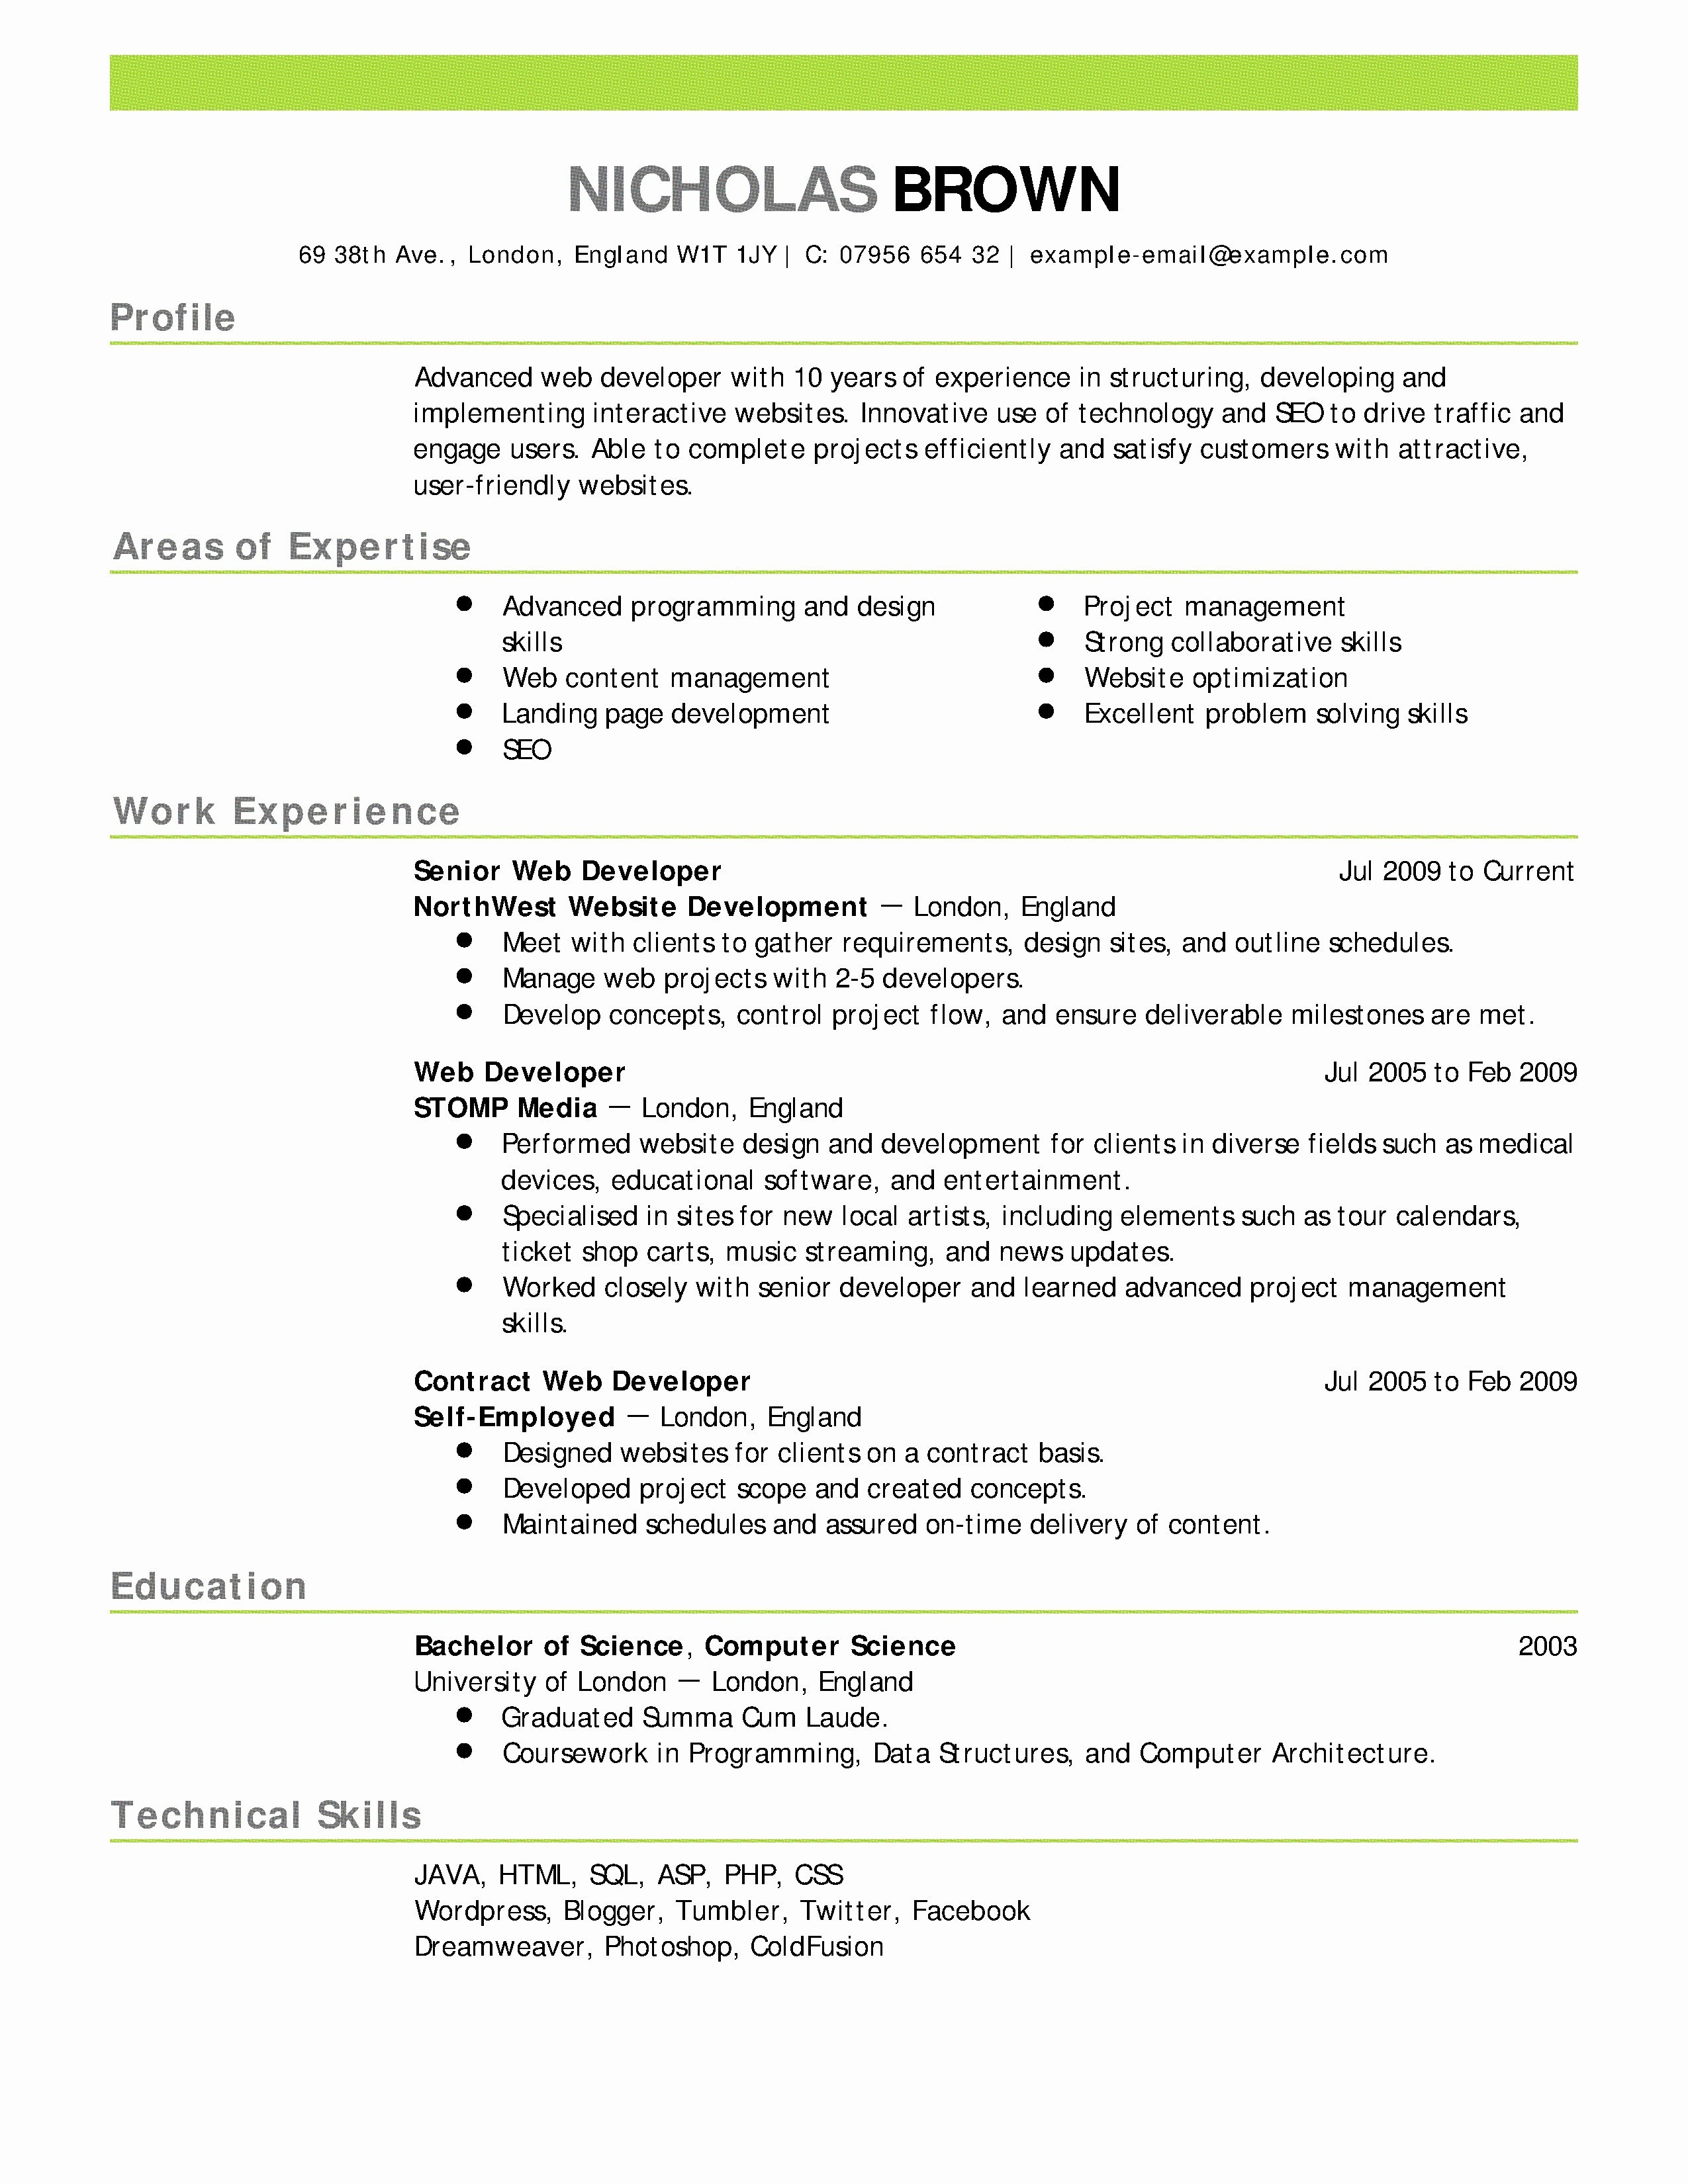 Resume Tips Templates High School Resume Template For College Application Unique College